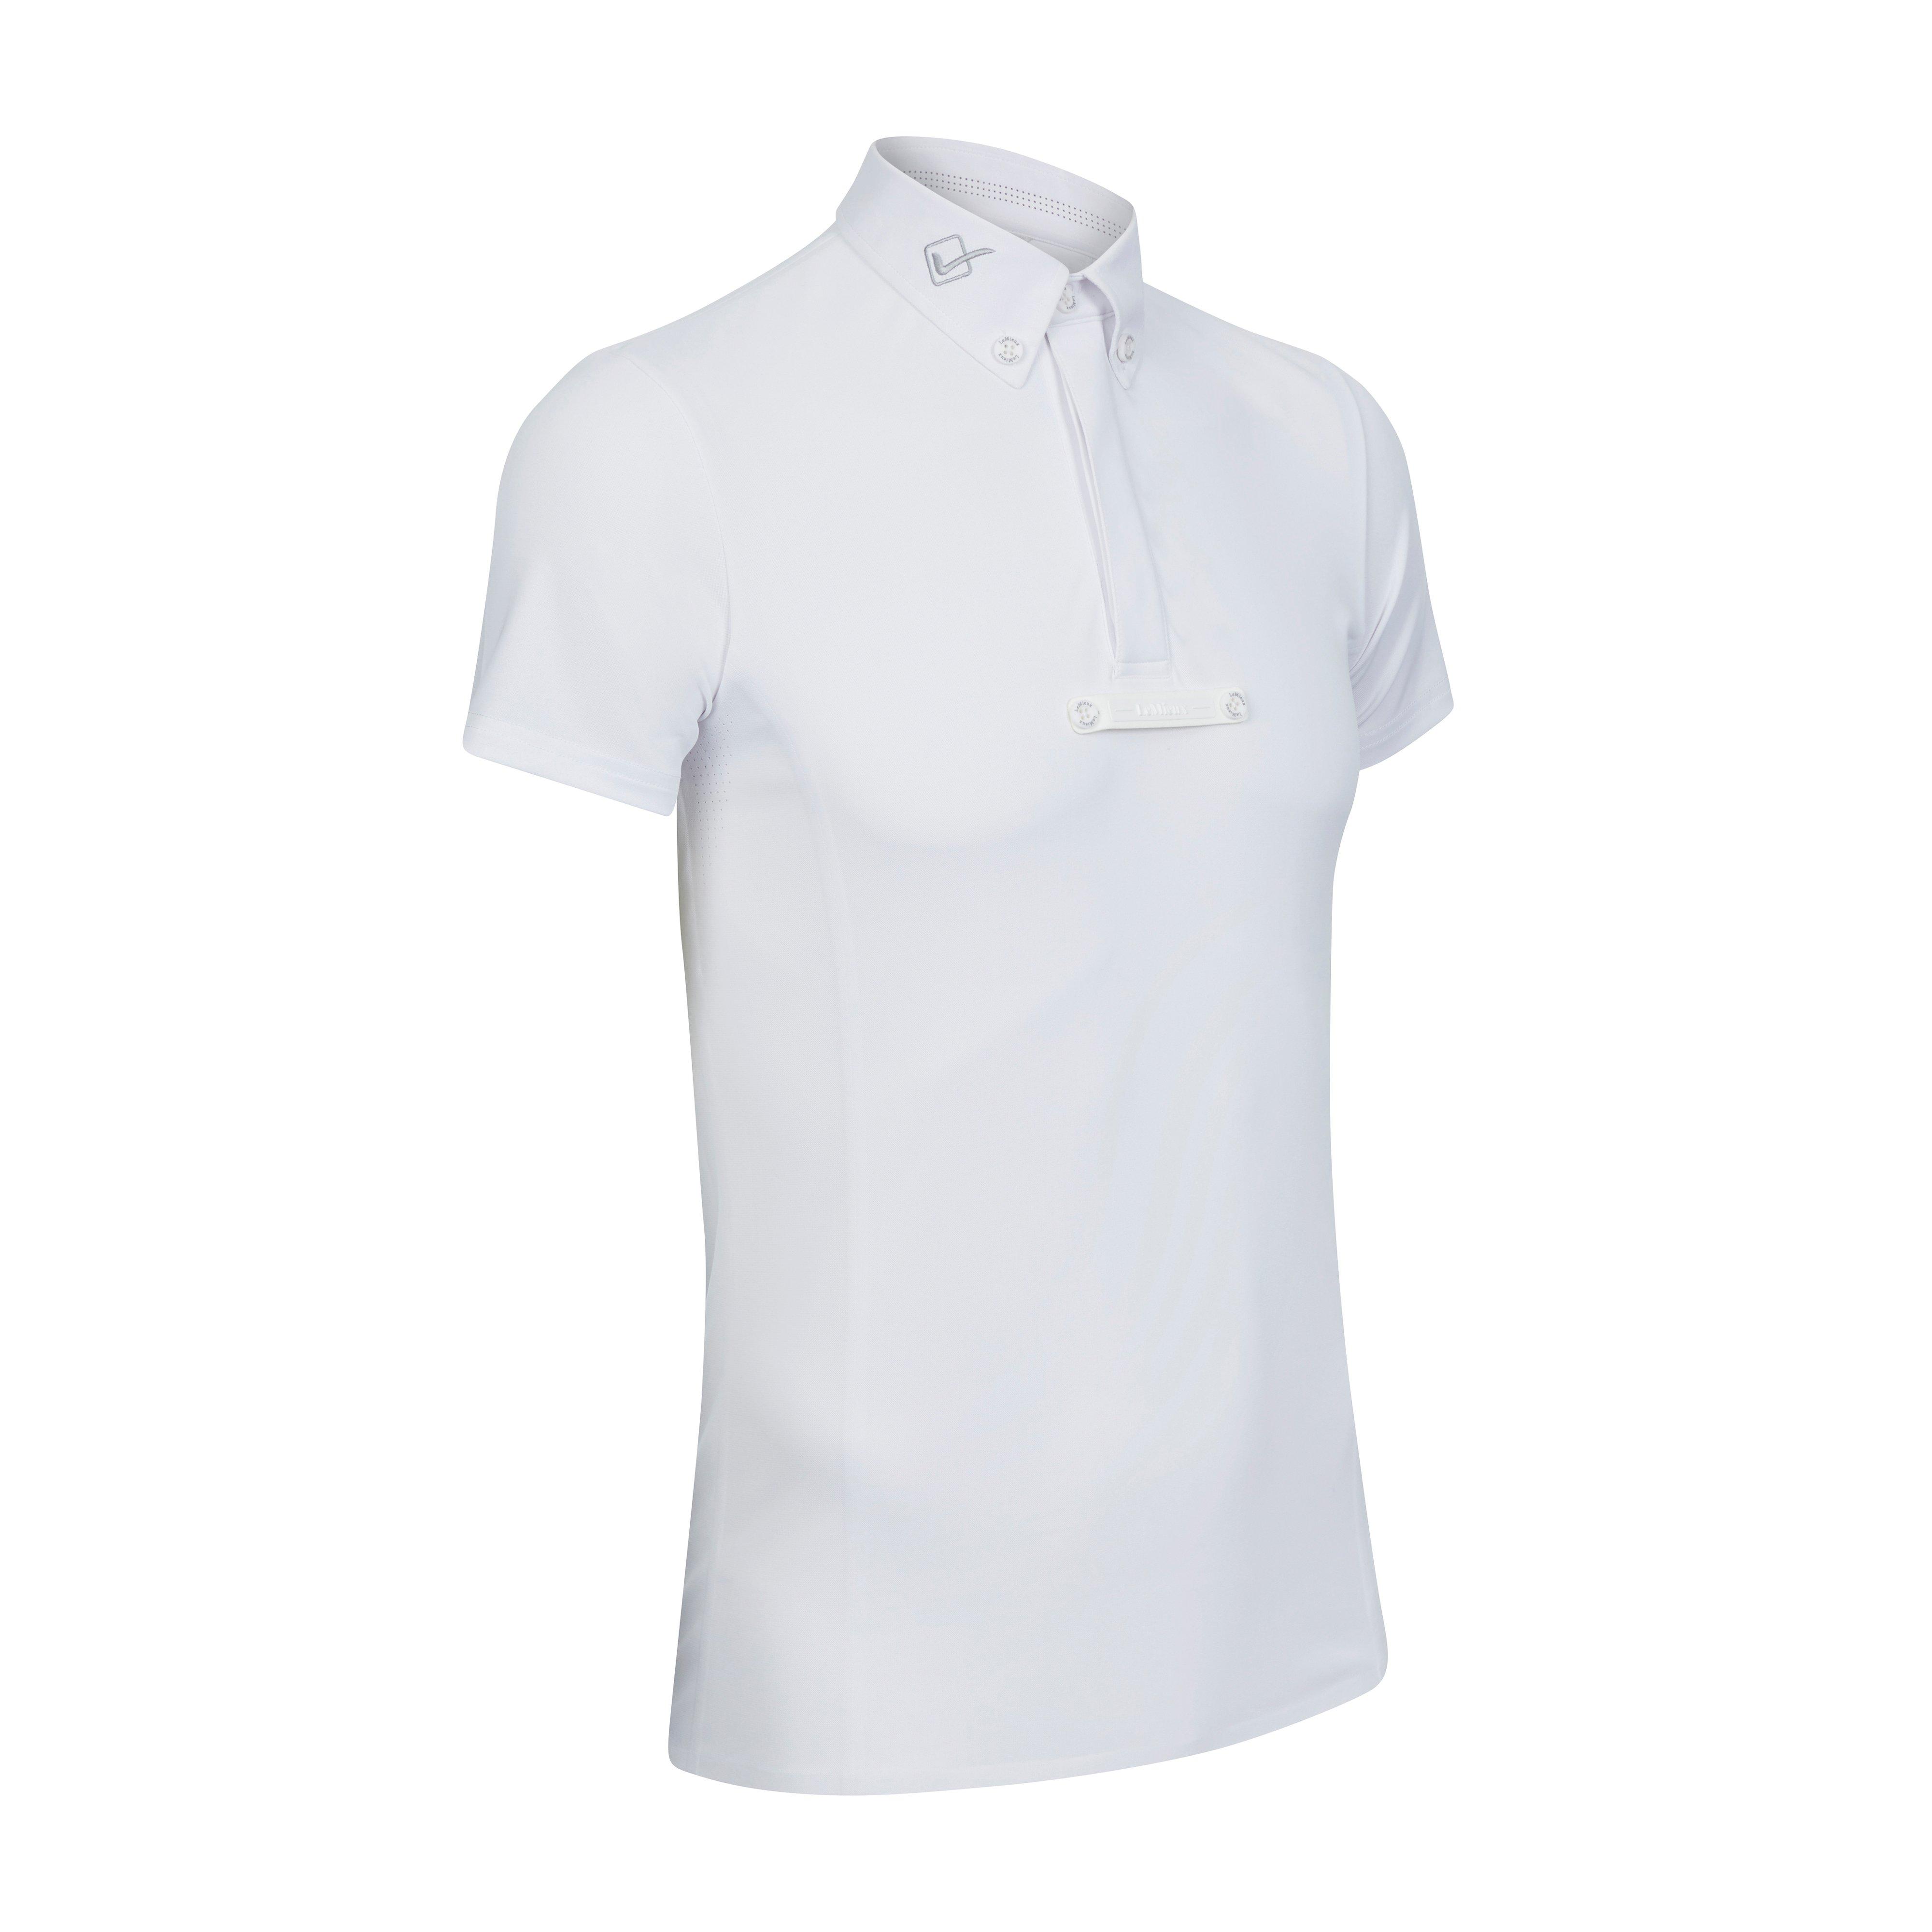 Mens Competition Shirt White